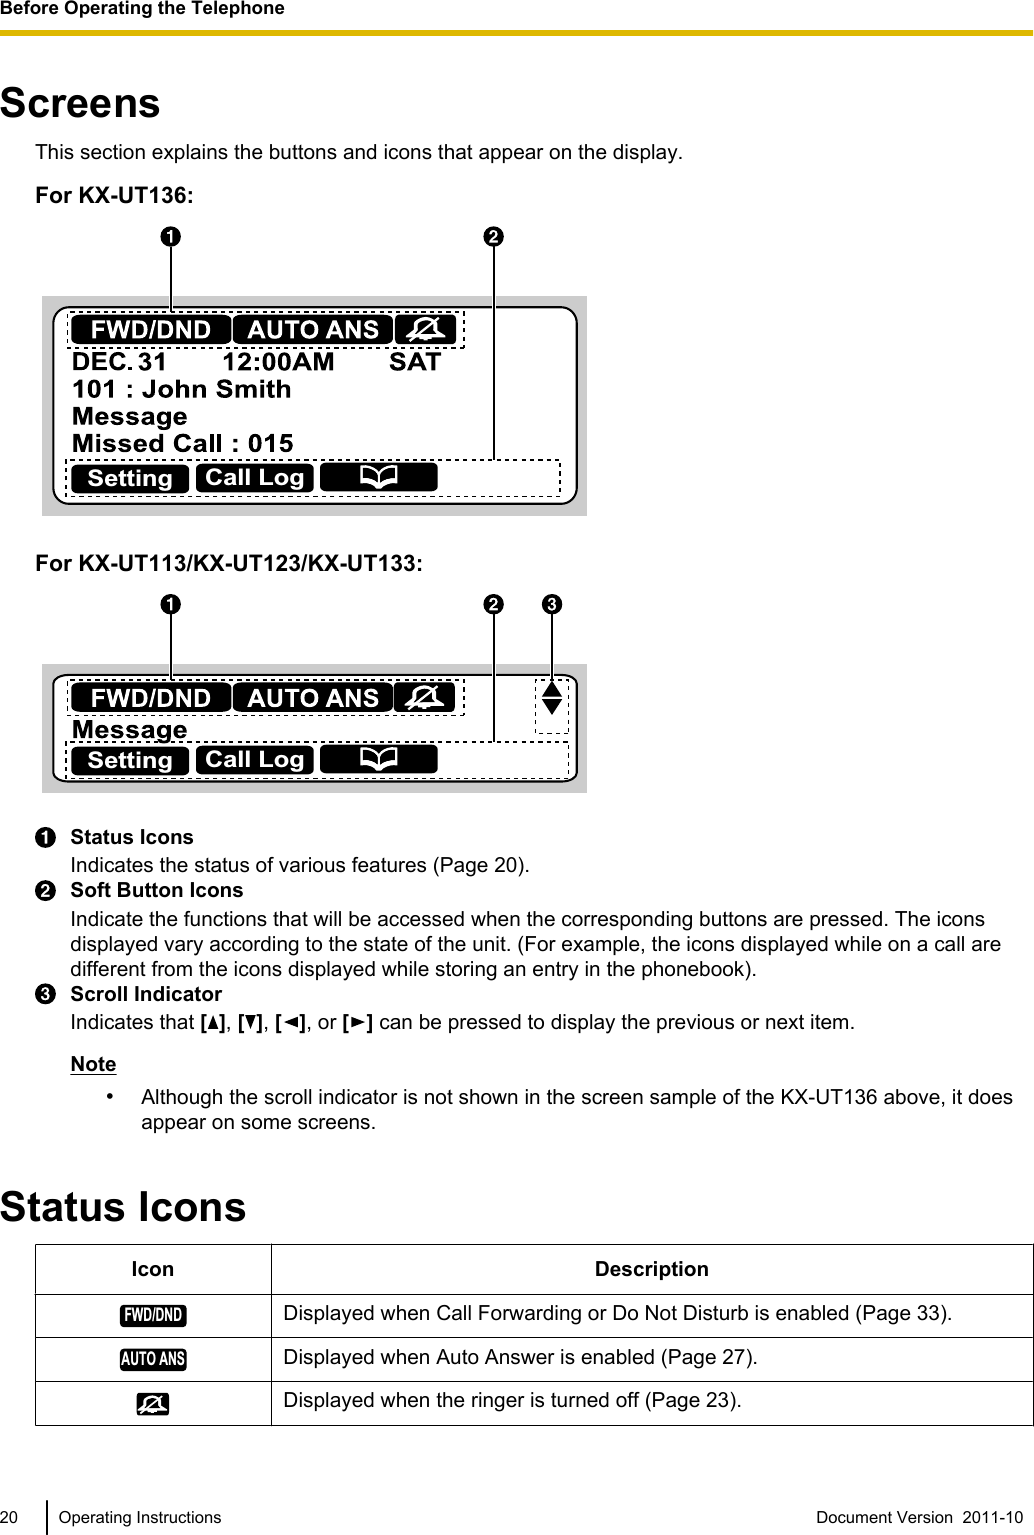 ScreensThis section explains the buttons and icons that appear on the display.For KX-UT136:Setting Call LogFor KX-UT113/KX-UT123/KX-UT133:Setting Call LogStatus IconsIndicates the status of various features (Page 20).Soft Button IconsIndicate the functions that will be accessed when the corresponding buttons are pressed. The iconsdisplayed vary according to the state of the unit. (For example, the icons displayed while on a call aredifferent from the icons displayed while storing an entry in the phonebook).Scroll IndicatorIndicates that [], [ ], [ ], or [ ] can be pressed to display the previous or next item.Note•Although the scroll indicator is not shown in the screen sample of the KX-UT136 above, it doesappear on some screens.Status IconsIcon DescriptionFWD/DNDDisplayed when Call Forwarding or Do Not Disturb is enabled (Page 33).AUTO ANSDisplayed when Auto Answer is enabled (Page 27).Displayed when the ringer is turned off (Page 23).20 Operating Instructions Document Version  2011-10  Before Operating the Telephone